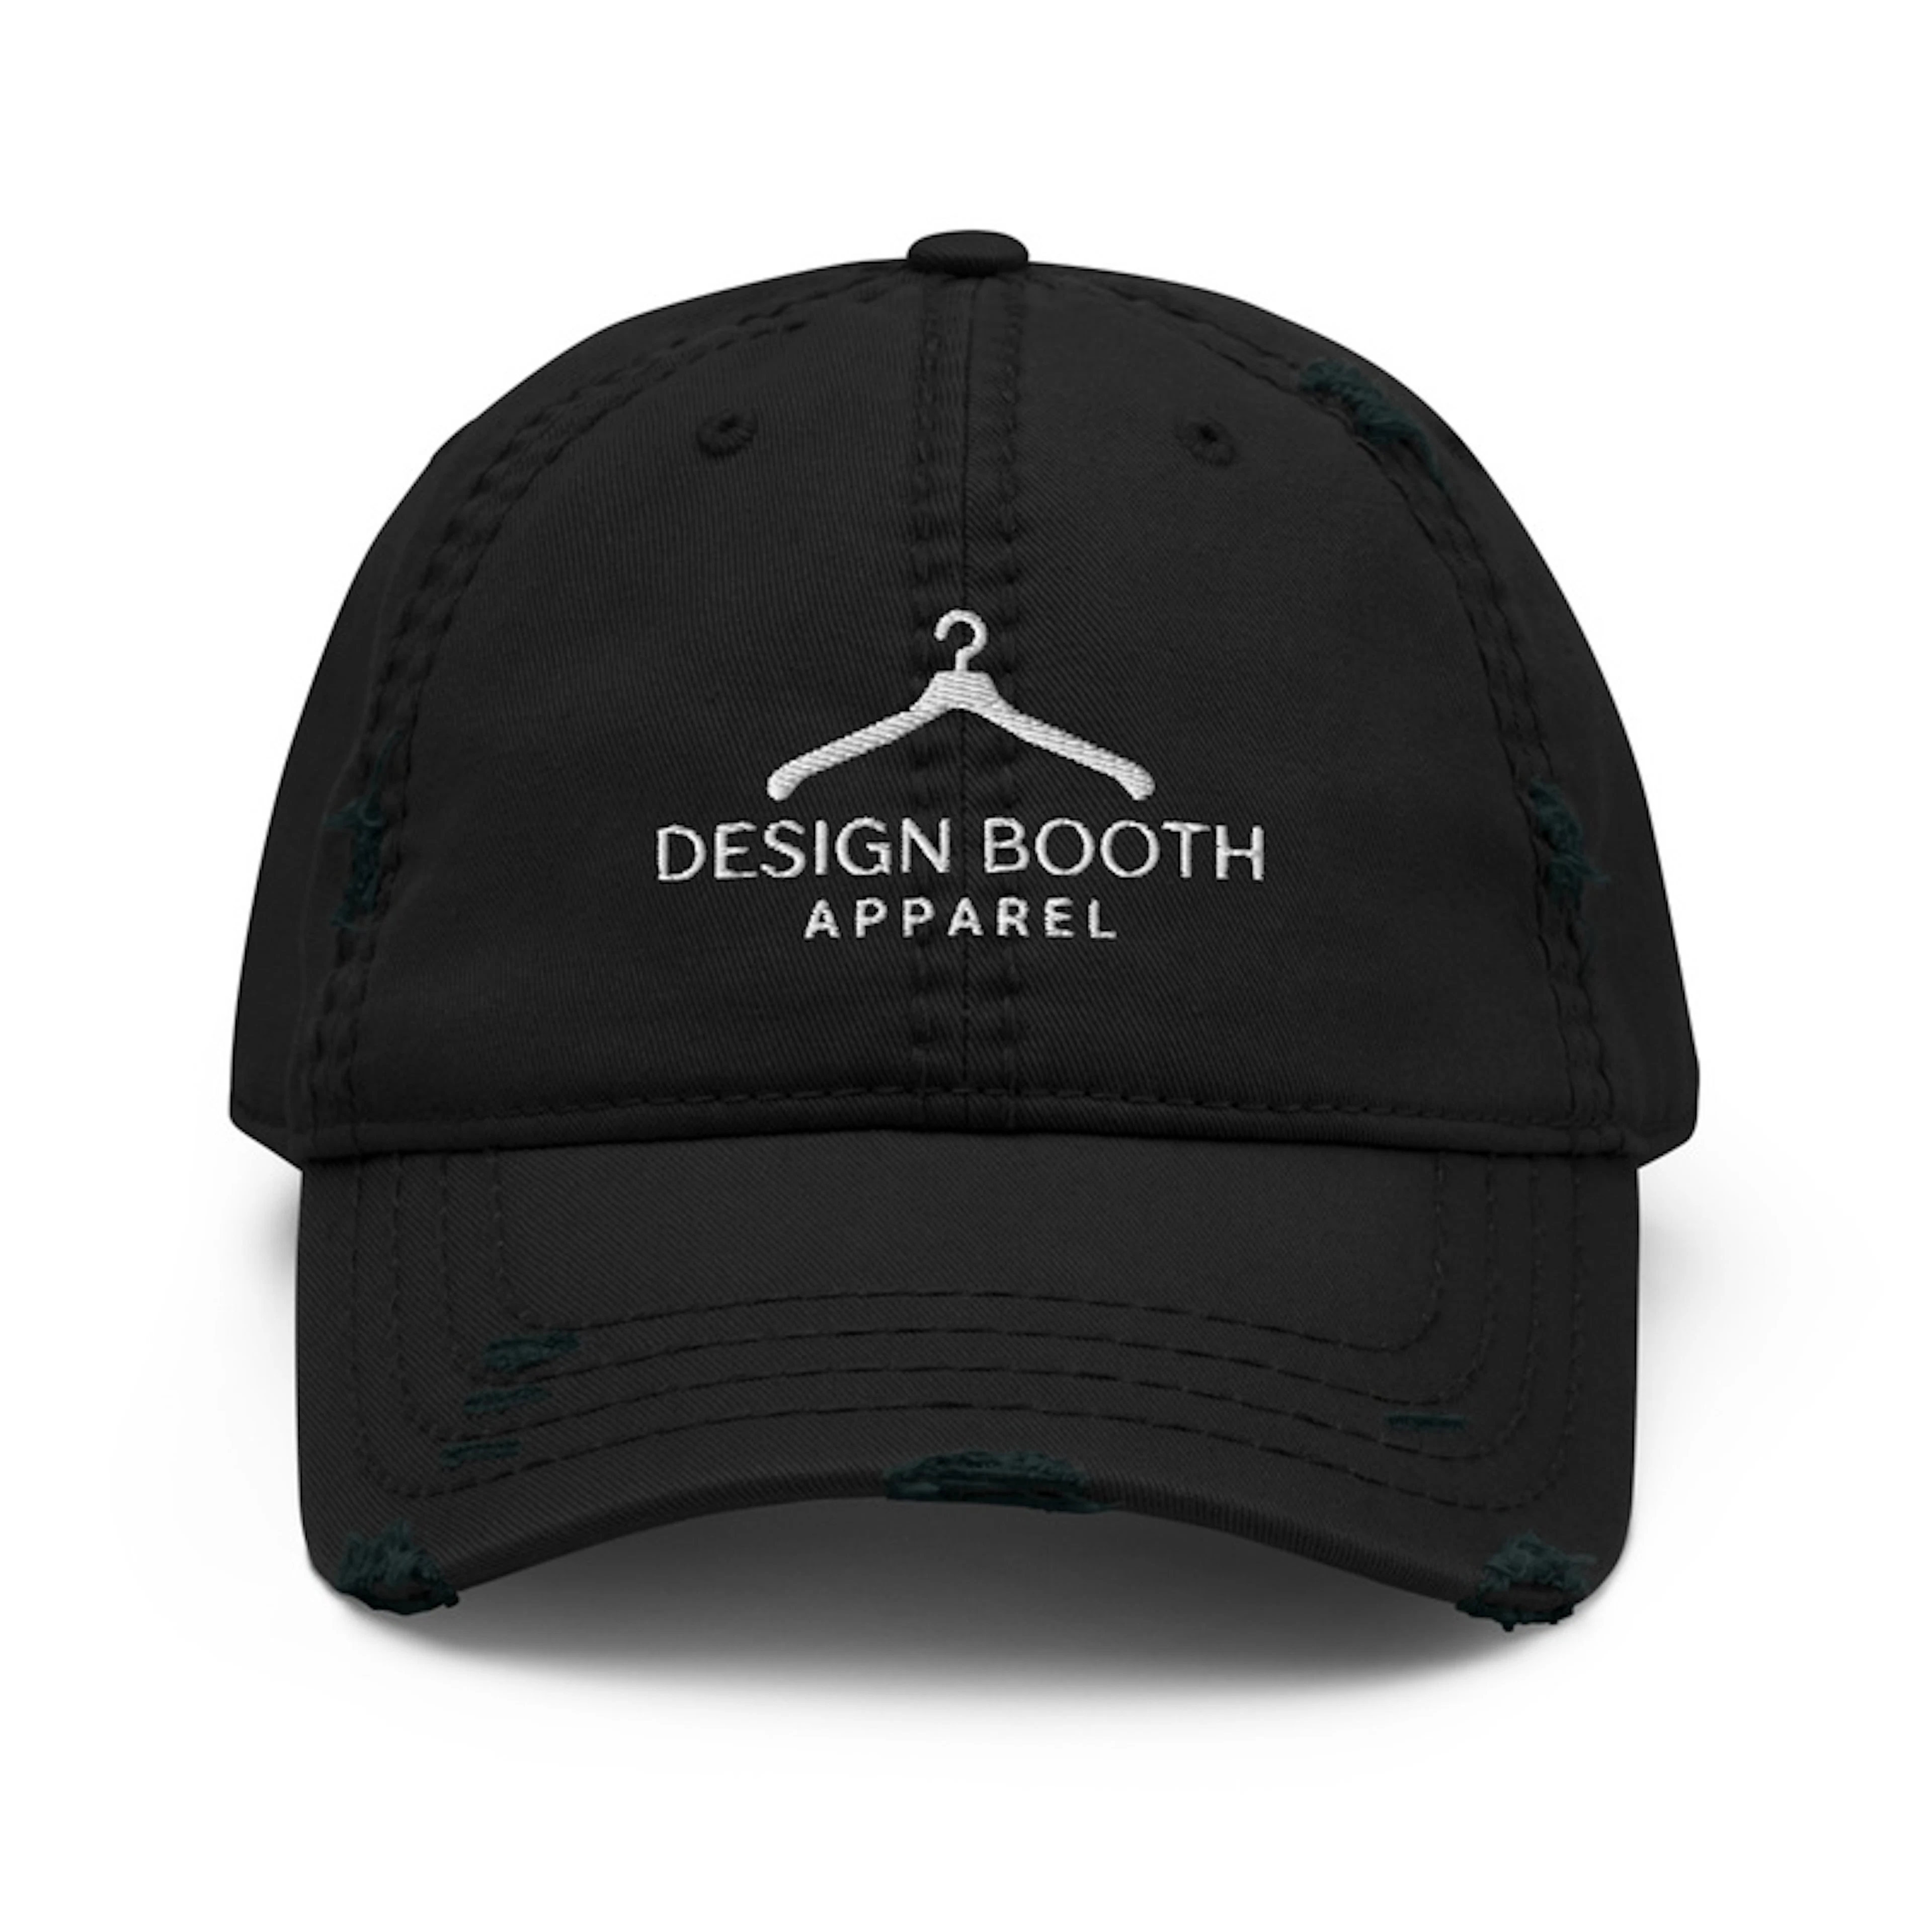 Design Booth Apparel Distressed Hat